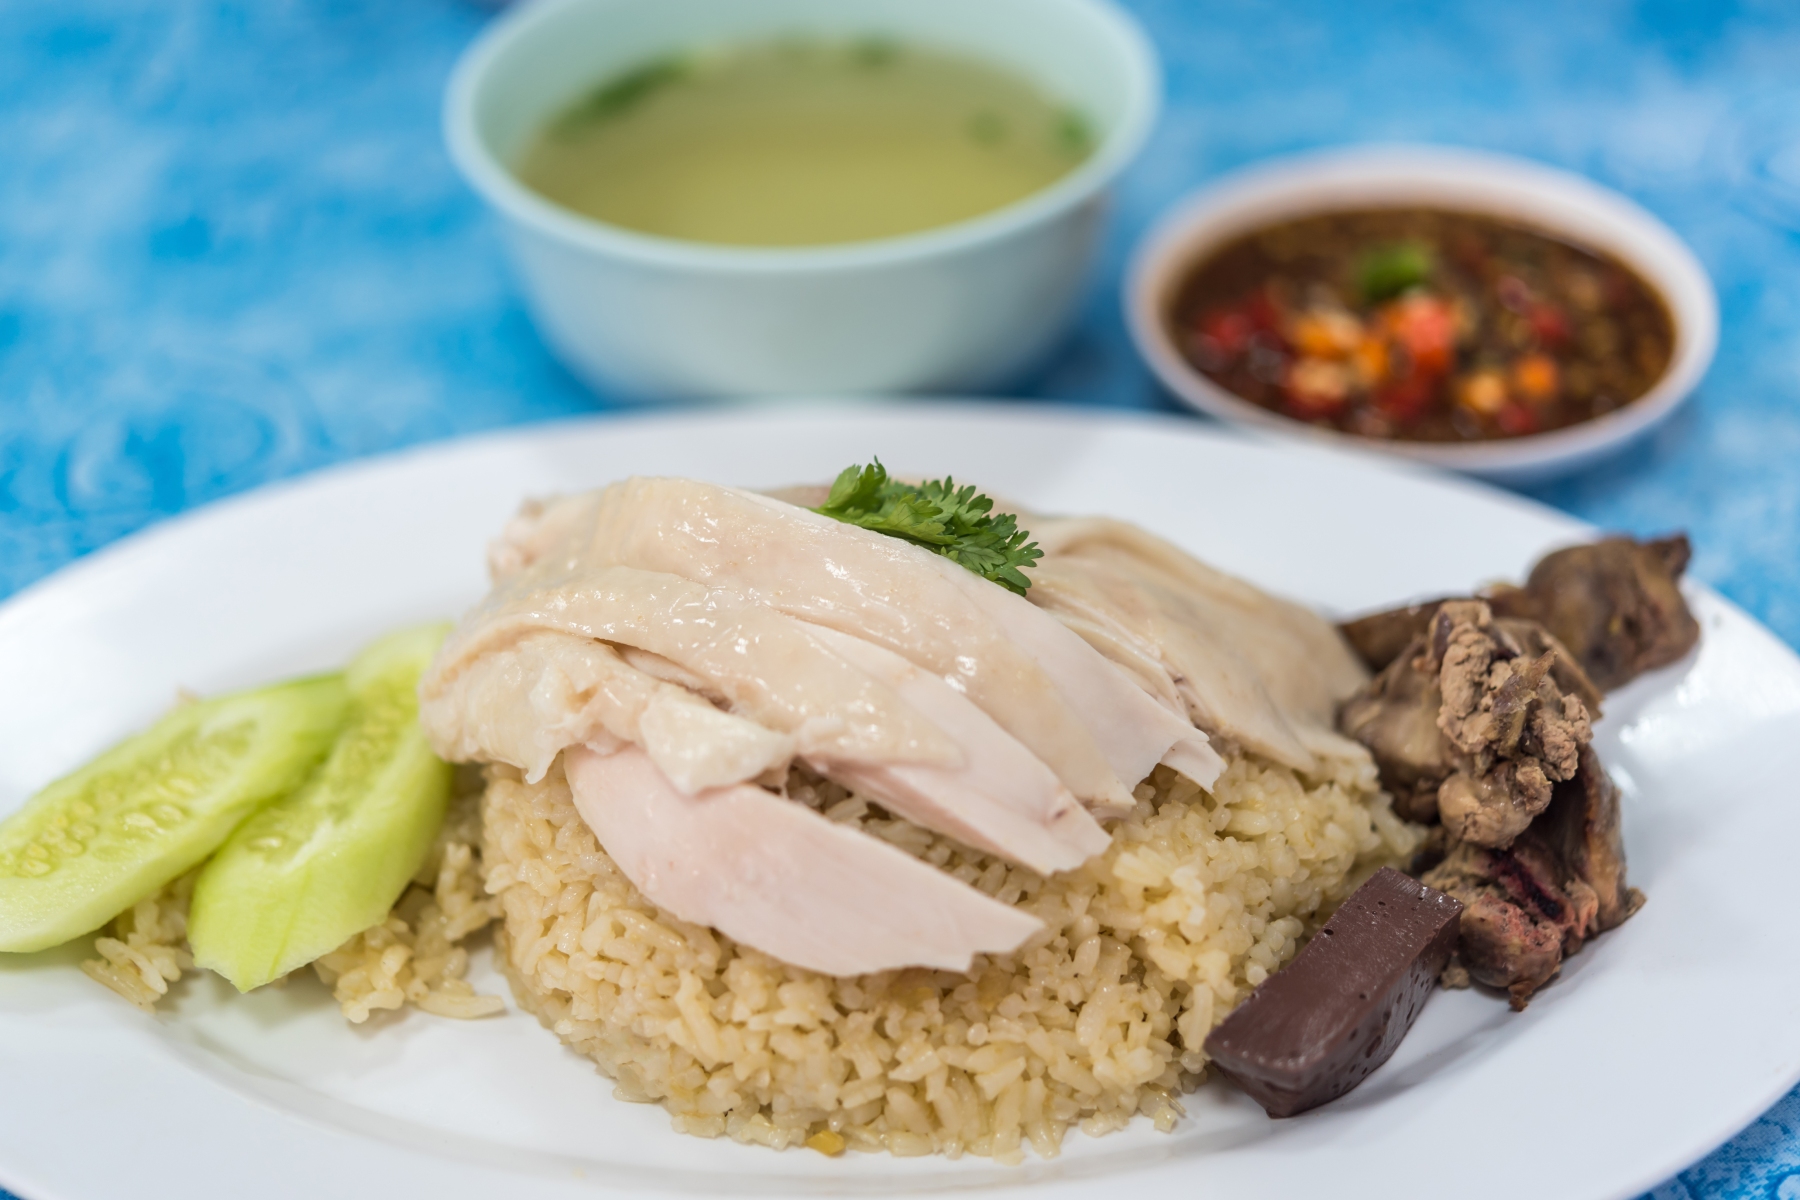 Steamed Hainese chicken rice served with cucumber, liver, soup, and sauce